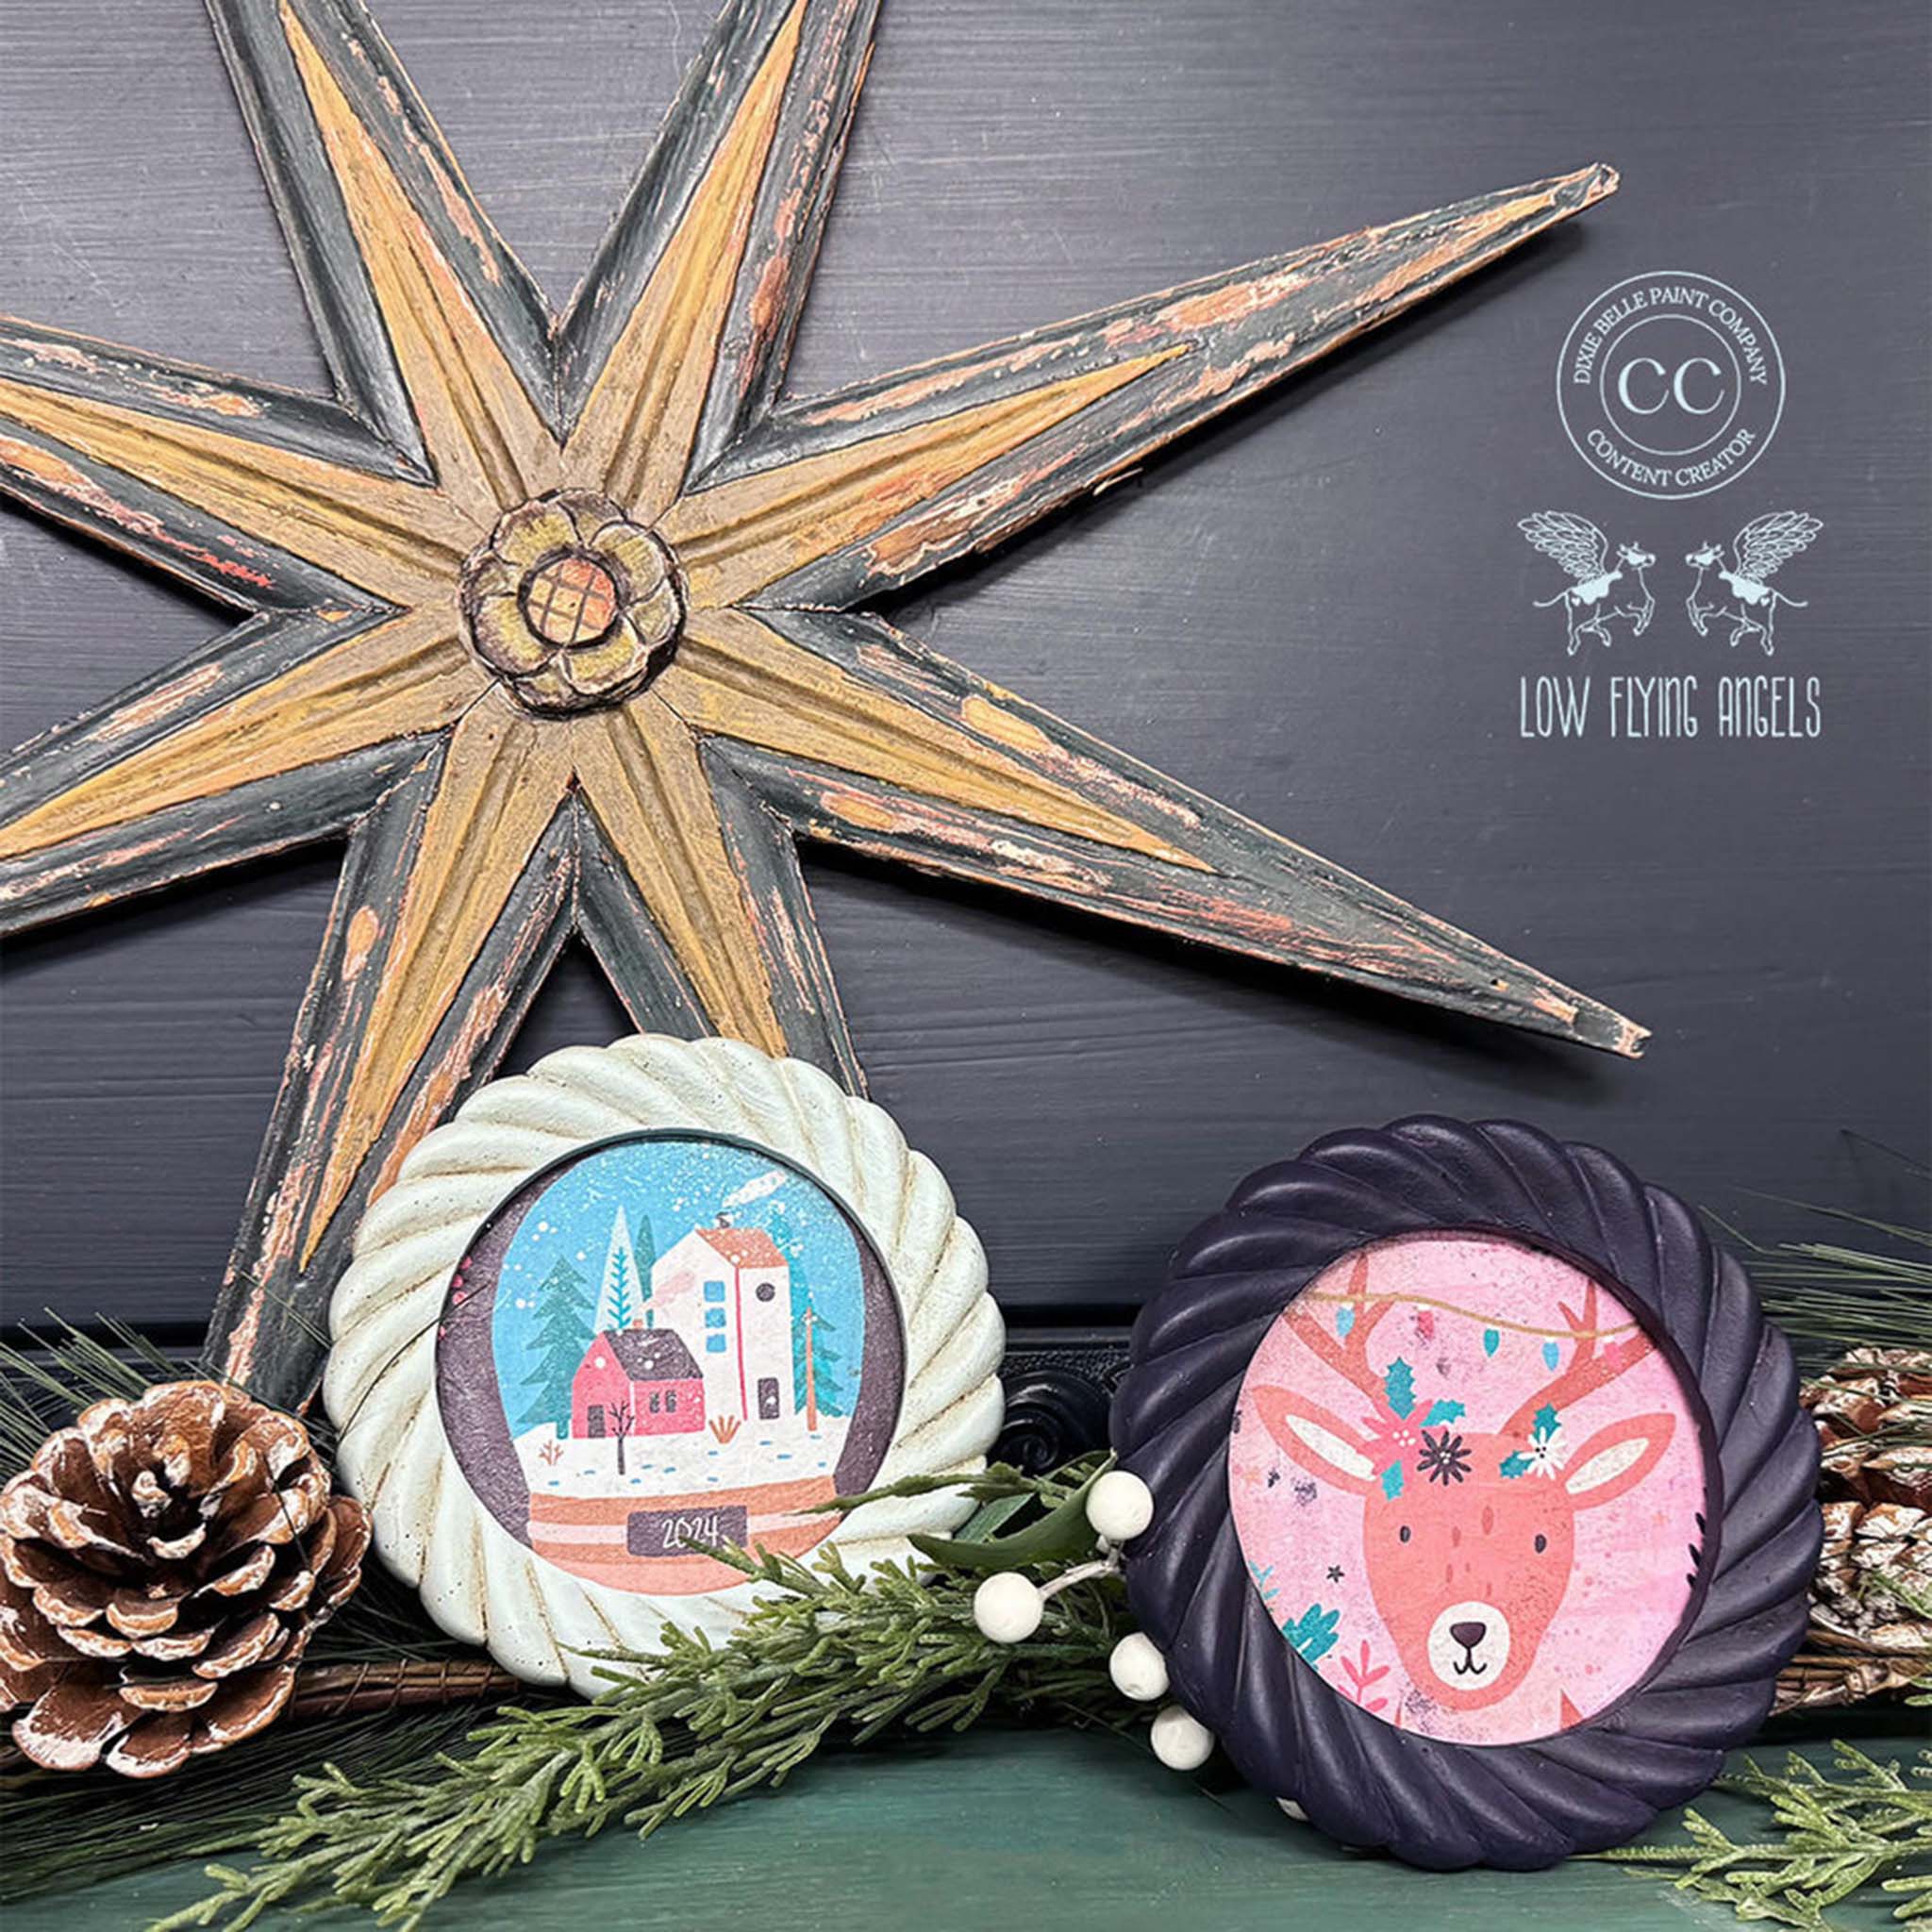 Two coasters created by Low Flying Angels feature Belles & Whistles' Jolly Jingles A4 rice paper on them.